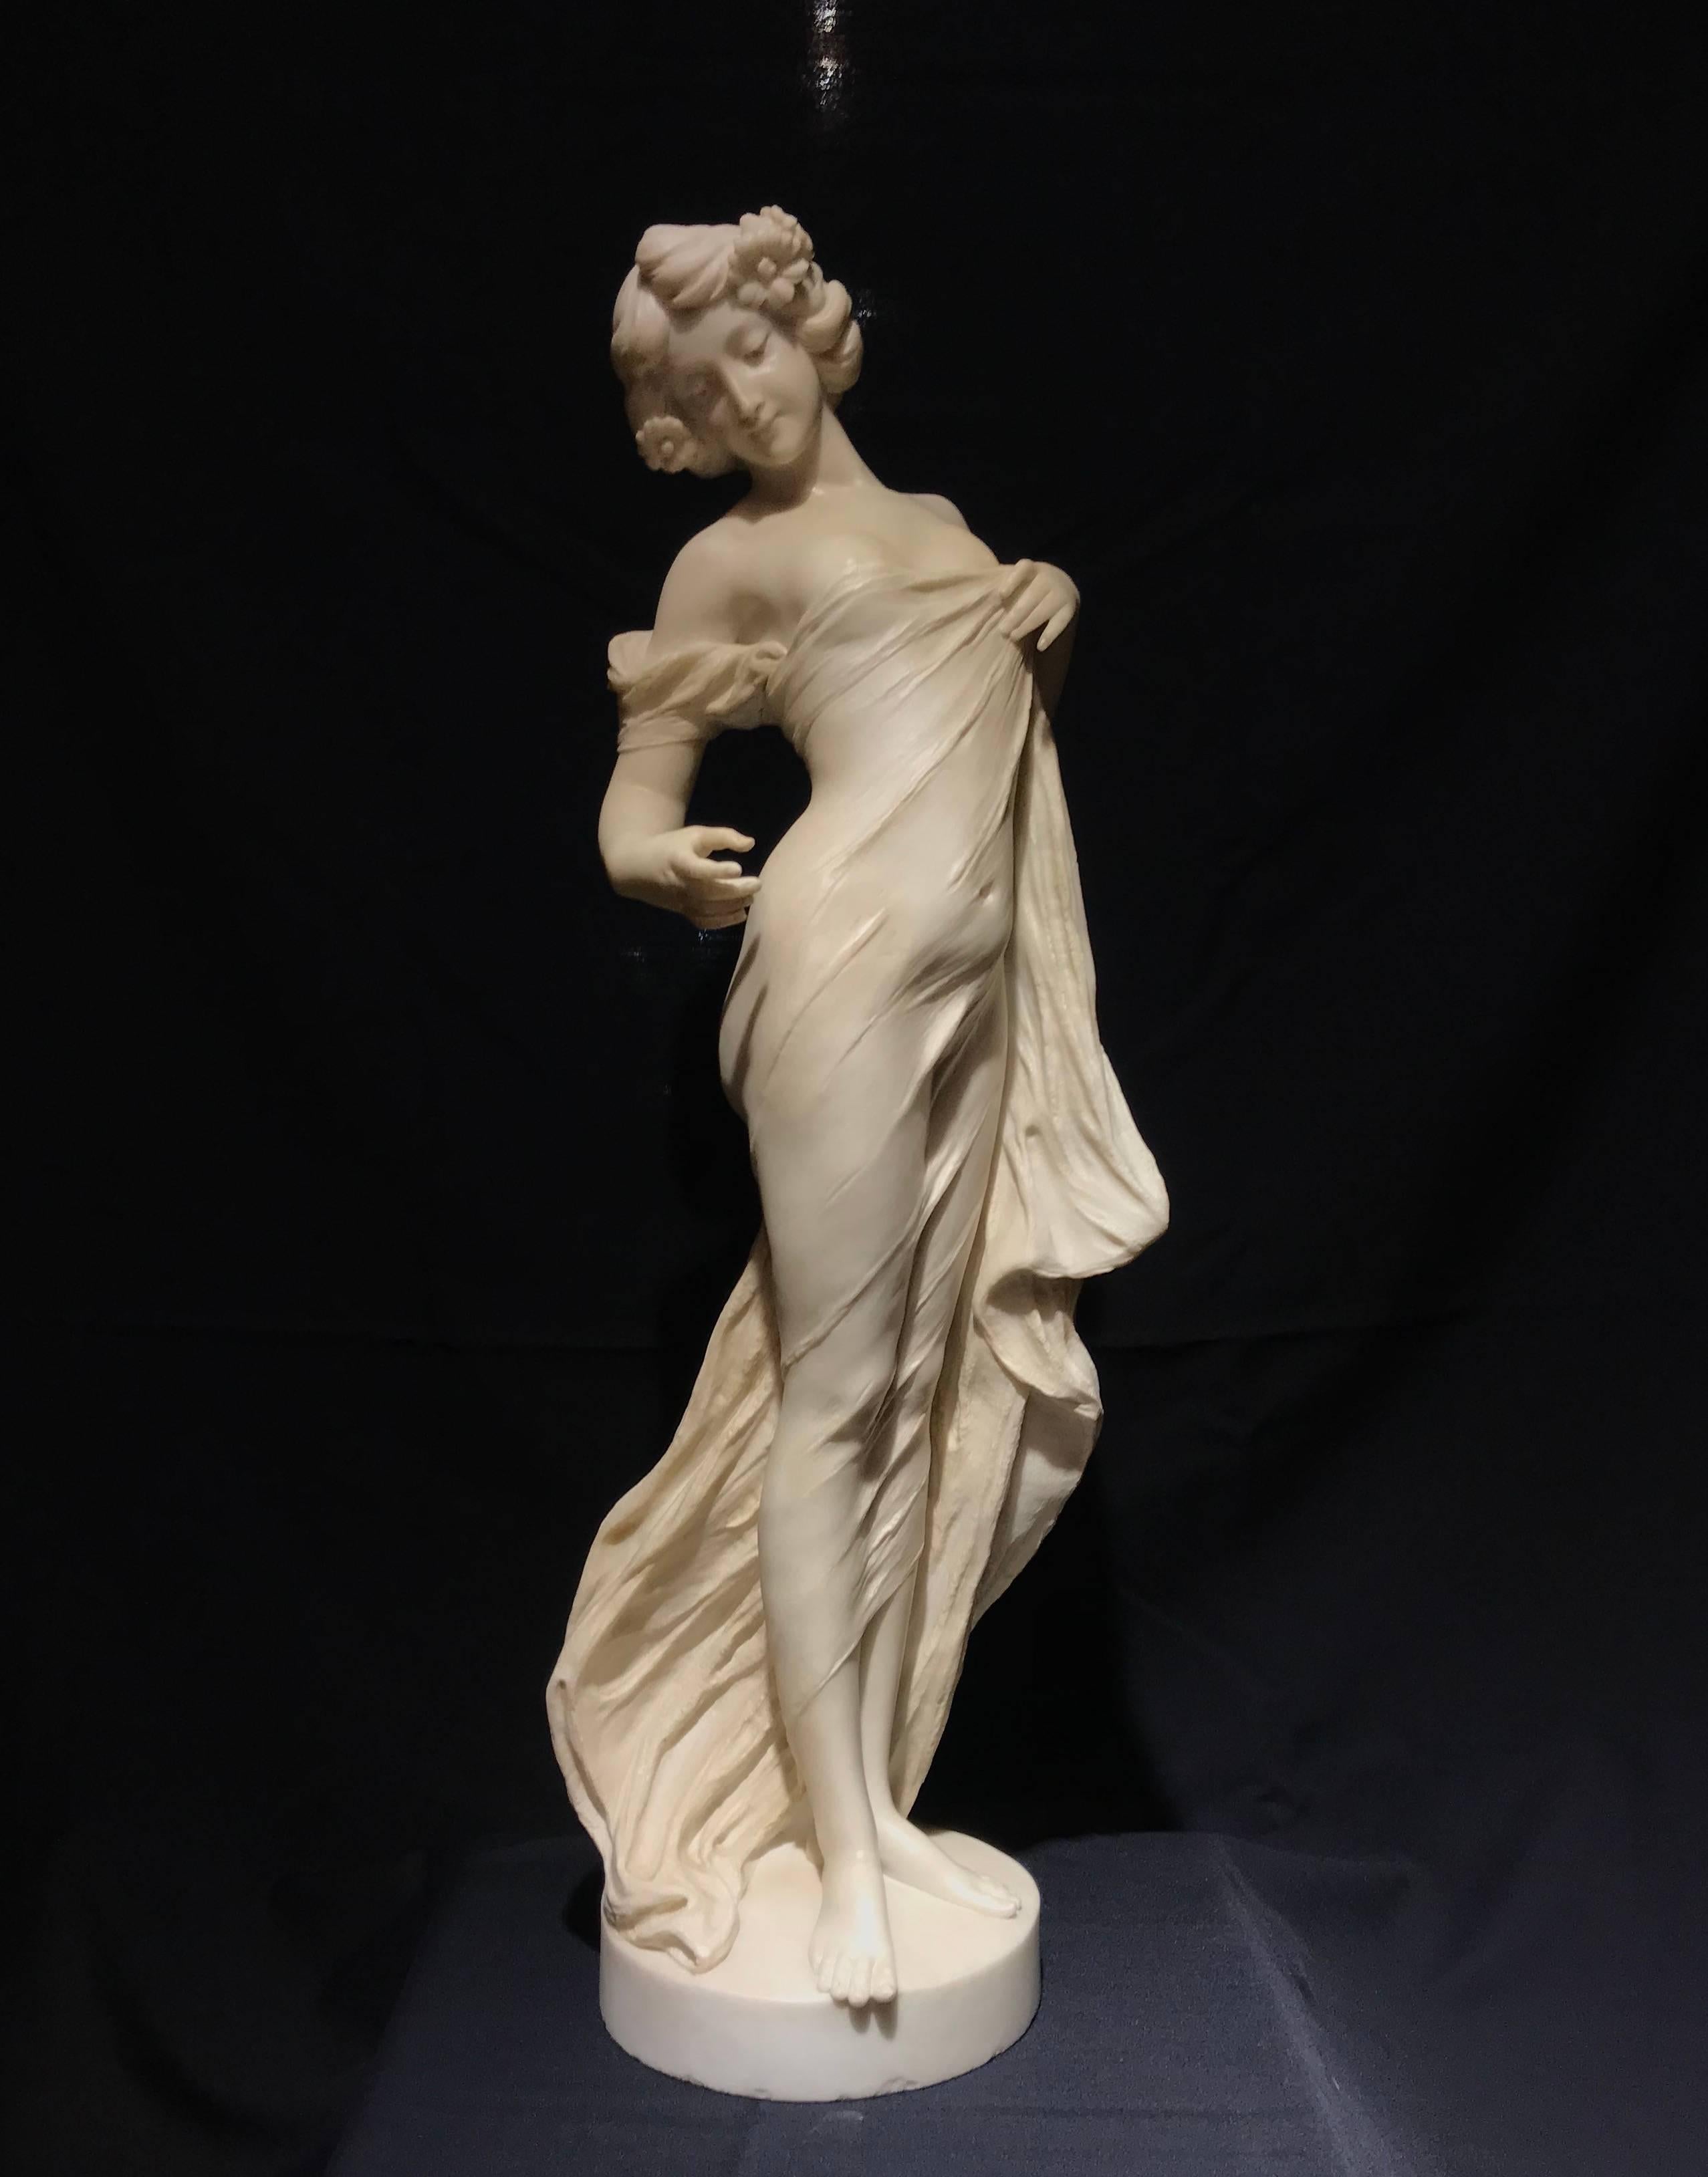 Hand-Carved 19th Century Neoclassical Italian White Marble Sculpture of Nymph